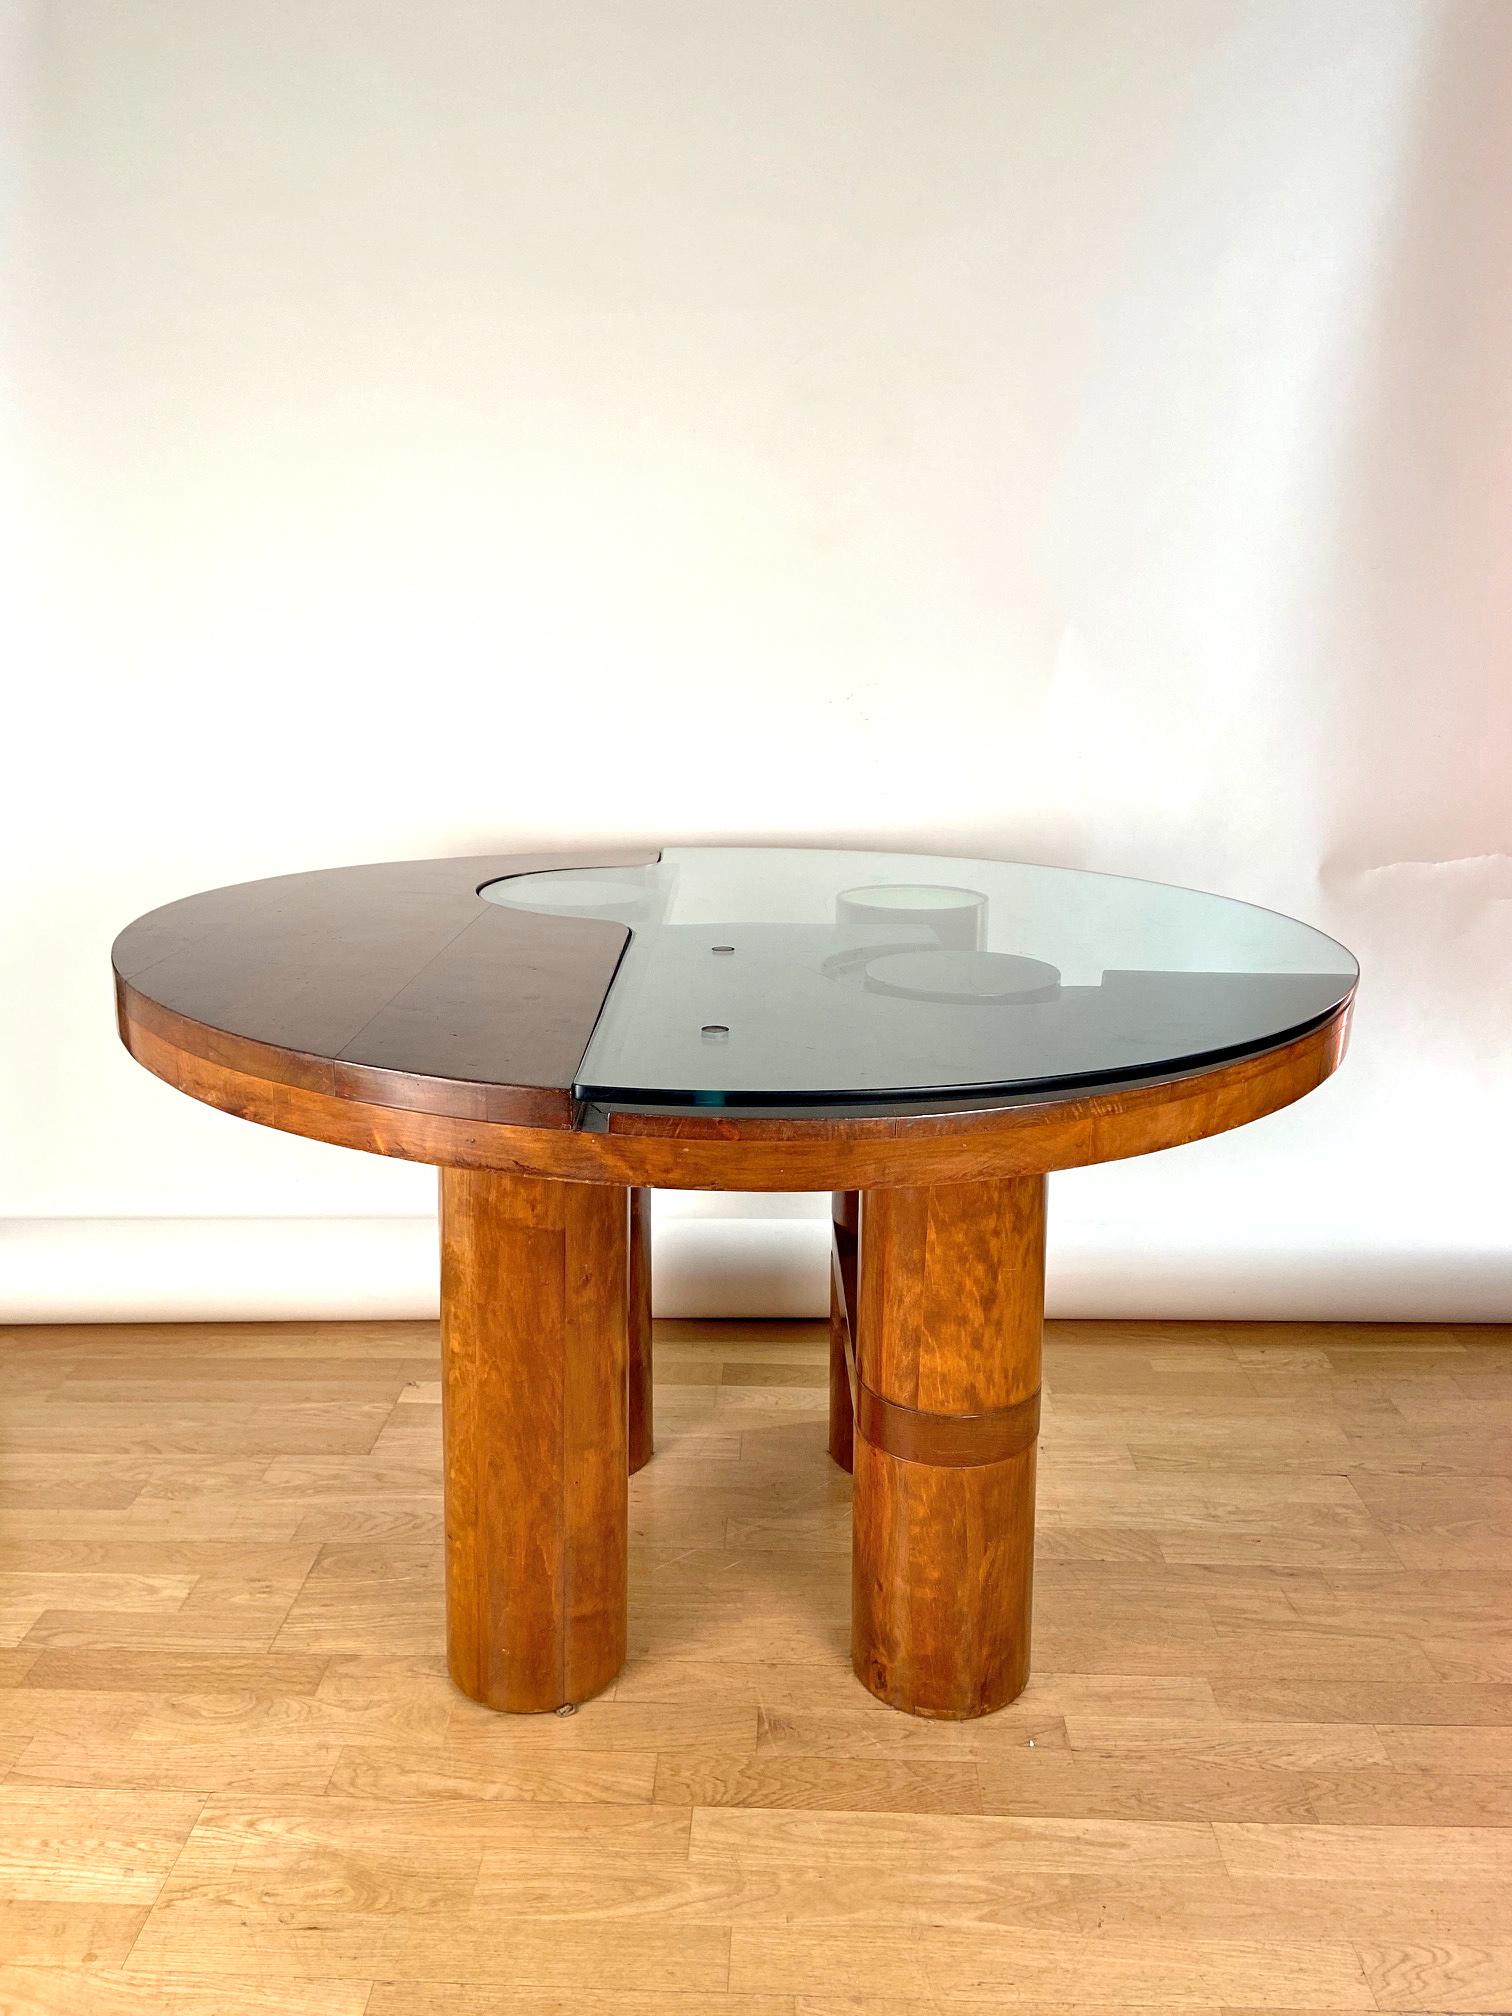 An sculptural and unique dining/center hall table. Designed by Nerone and Patuzzi and edited by NP2 Group . Walnut structure and glass and wooden top on four wooden legs ended by wooden and brass finishings, circa 1970.Excellent condition. A